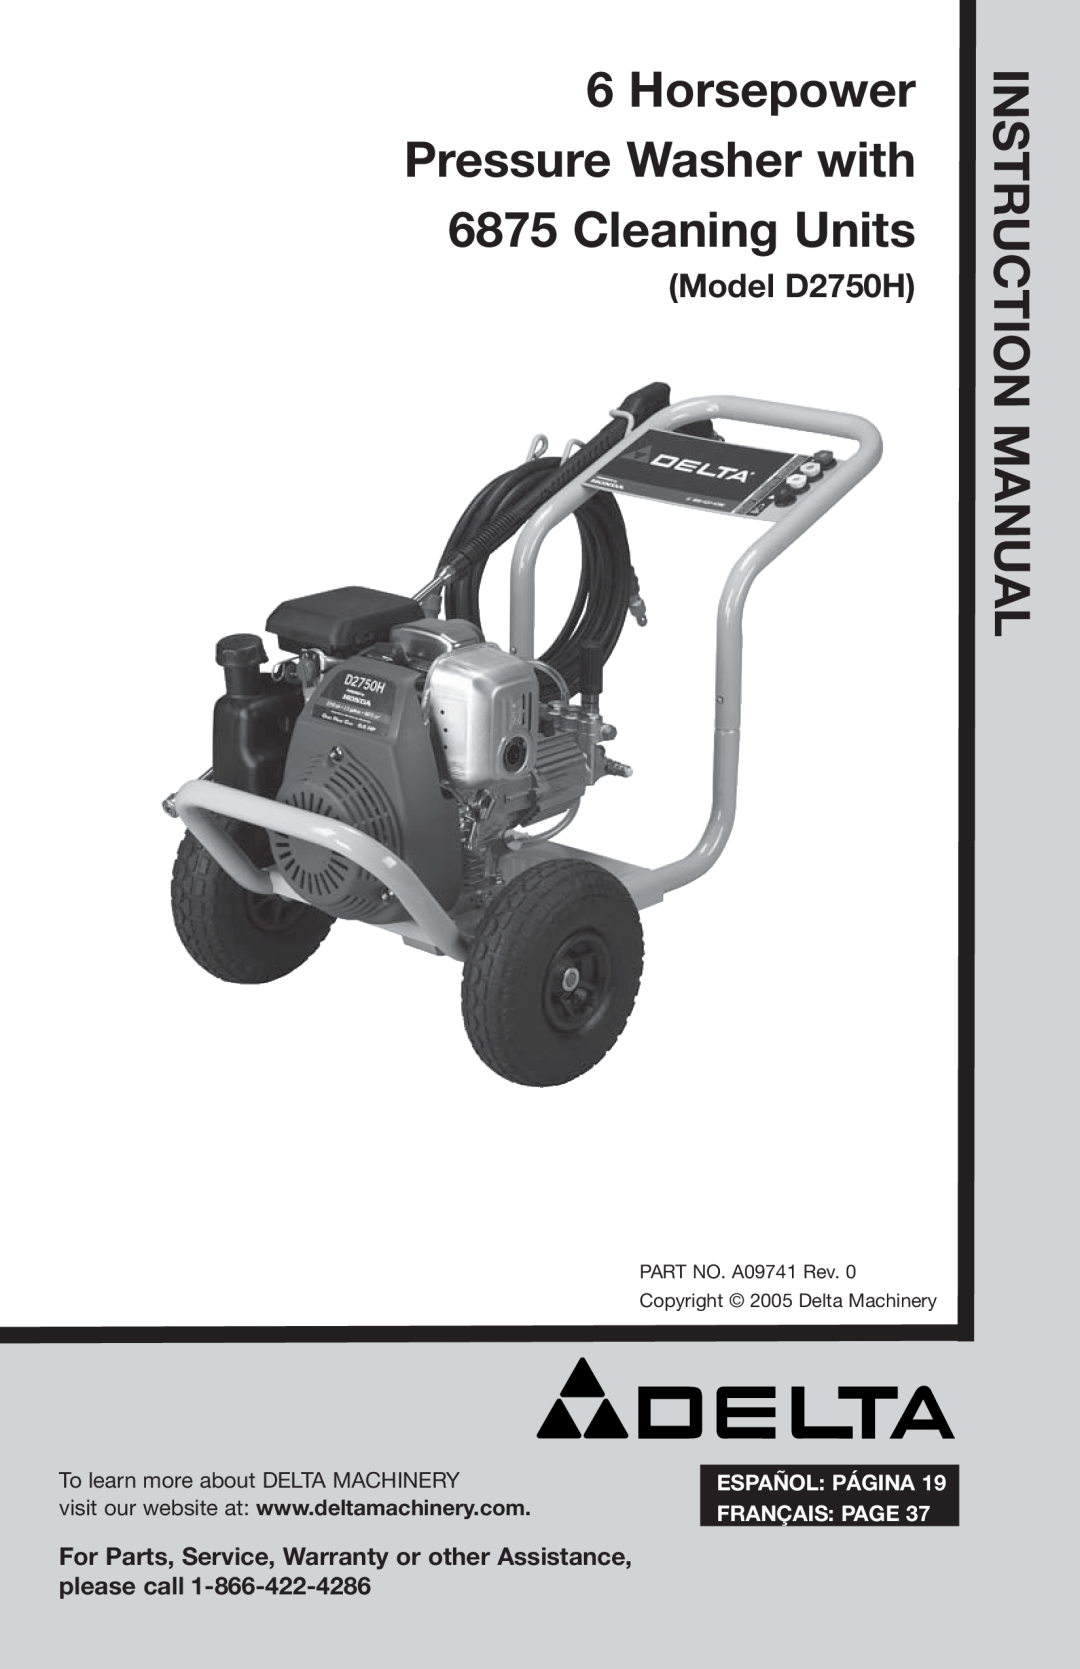 Delta instruction manual Model D2750H, Horsepower Pressure Washer with 6875 Cleaning Units, Español Página 